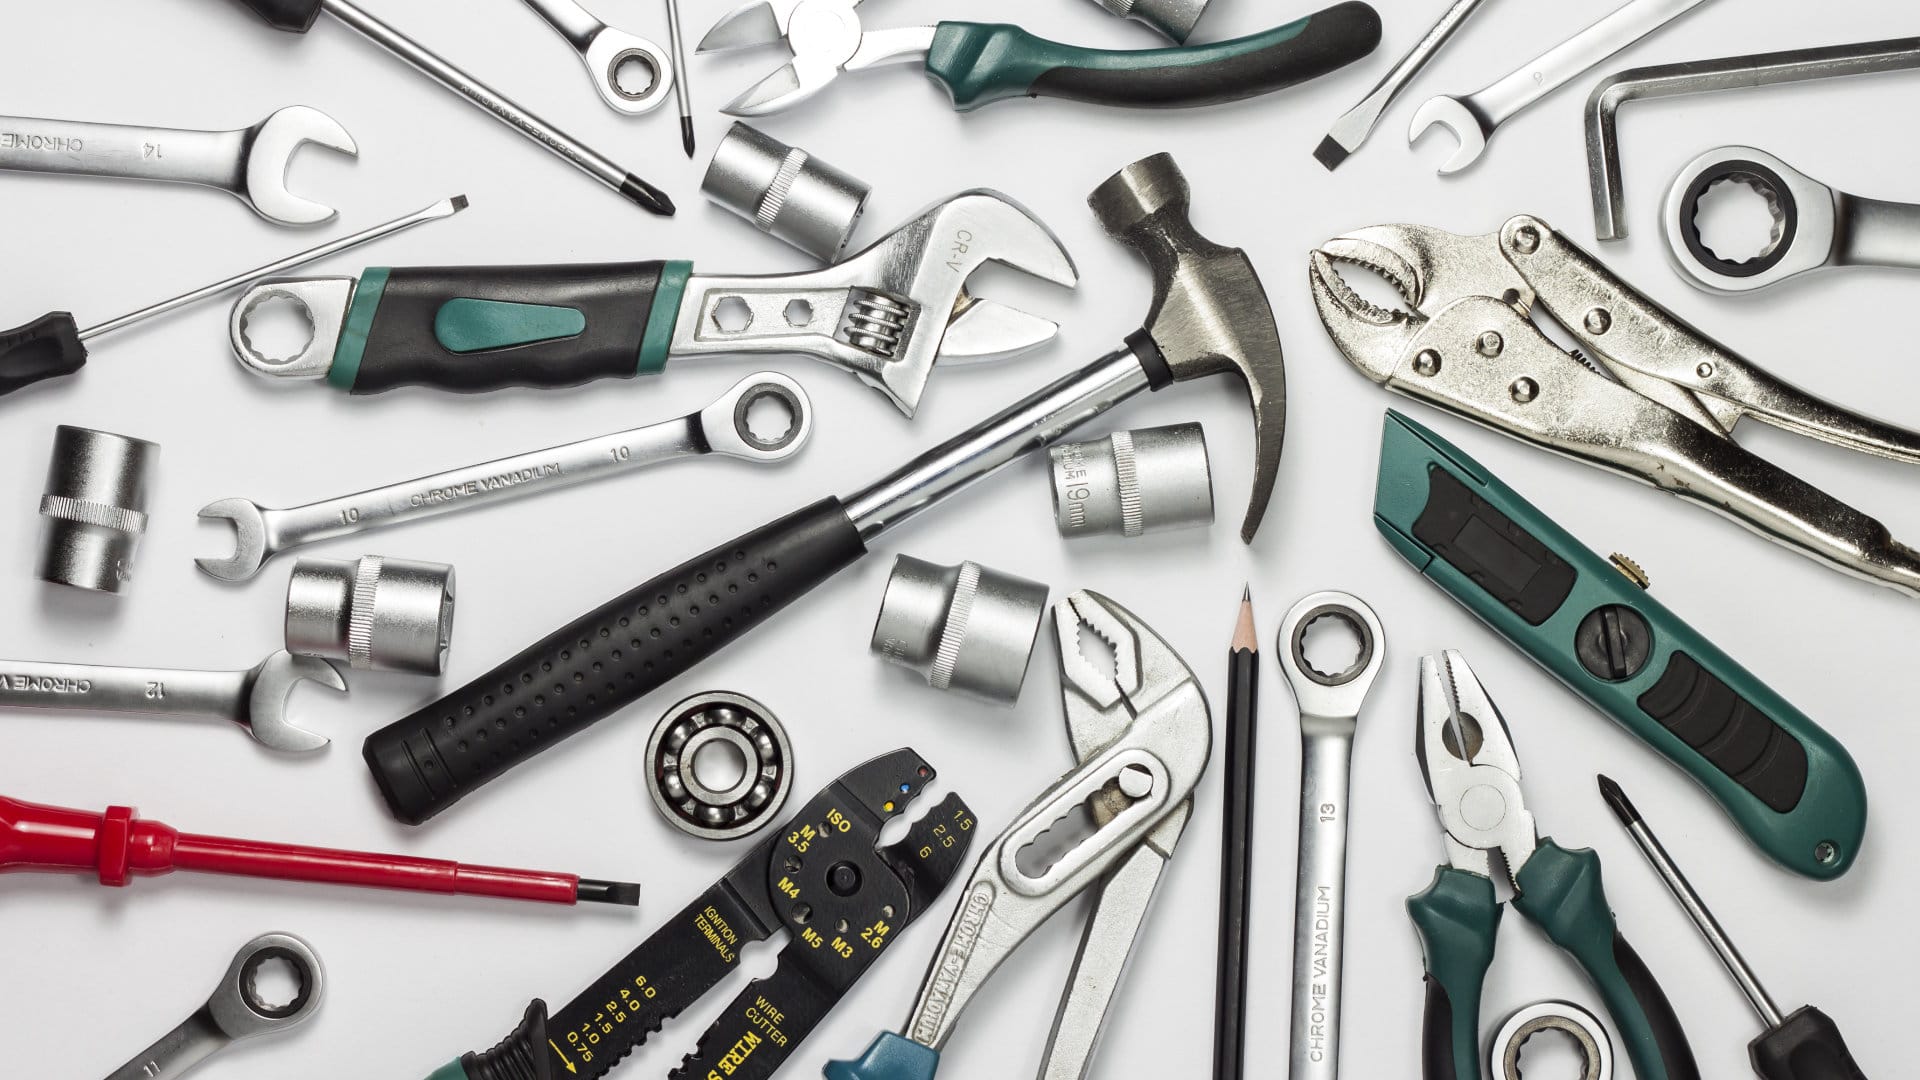 10 Essential Tools Every DIY Enthusiast Should Have in Their Toolbox